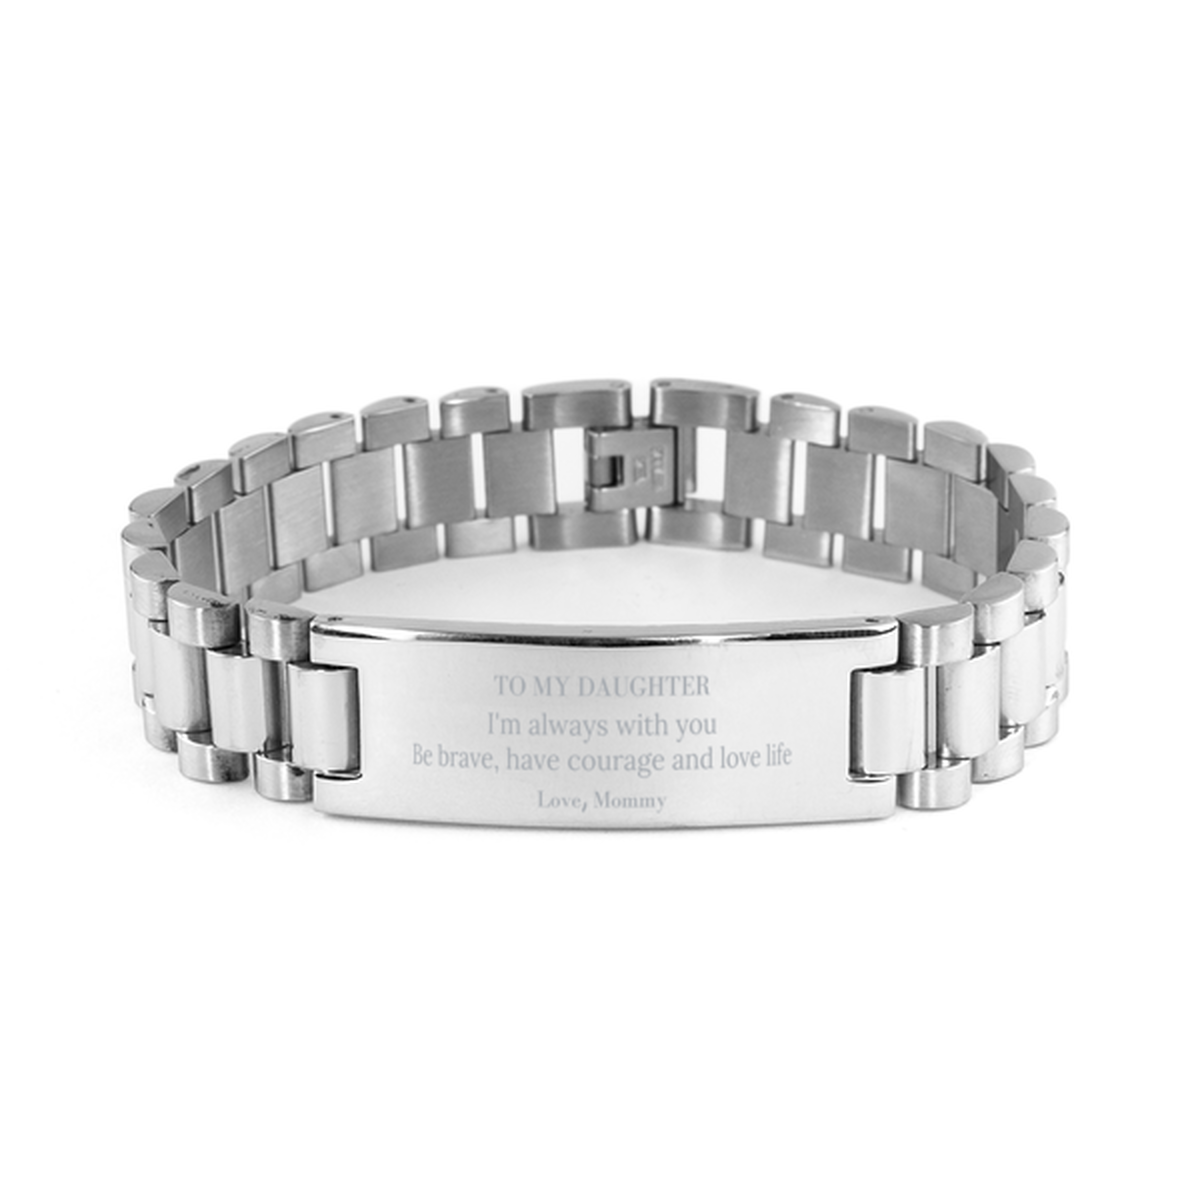 To My Daughter Gifts from Mommy, Unique Ladder Stainless Steel Bracelet Inspirational Christmas Birthday Graduation Gifts for Daughter I'm always with you. Be brave, have courage and love life. Love, Mommy